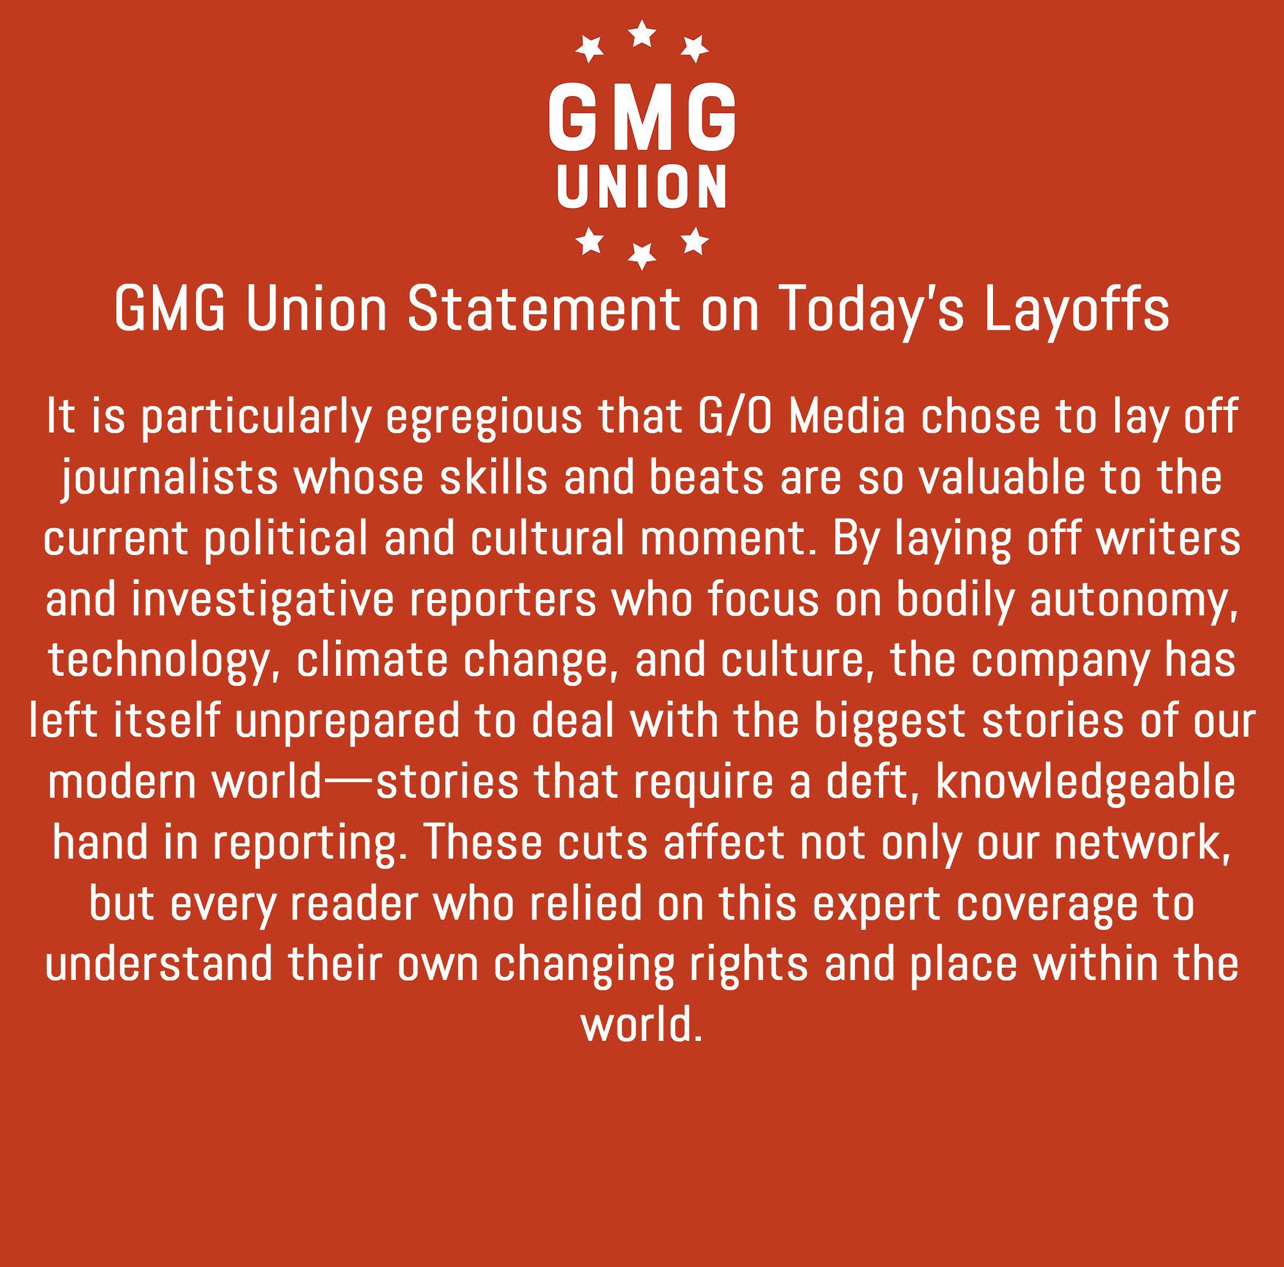 GG Union Statement on Today's Layoffs It is particularly egregious that G/O Media chose to lay off journalists whose skills and beats are so valuable to the current political and cultural moment. By laying off writers and investigative reporters who focus on bodily autonomy, technology, climate change, and culture, the company has left itself unprepared to deal with the biggest stories of our modern world- stories that require a deft, knowledgeable hand in reporting. These cuts affect not only our network, but every reader who relied on this expert coverage to understand their own changing rights and place within the world.